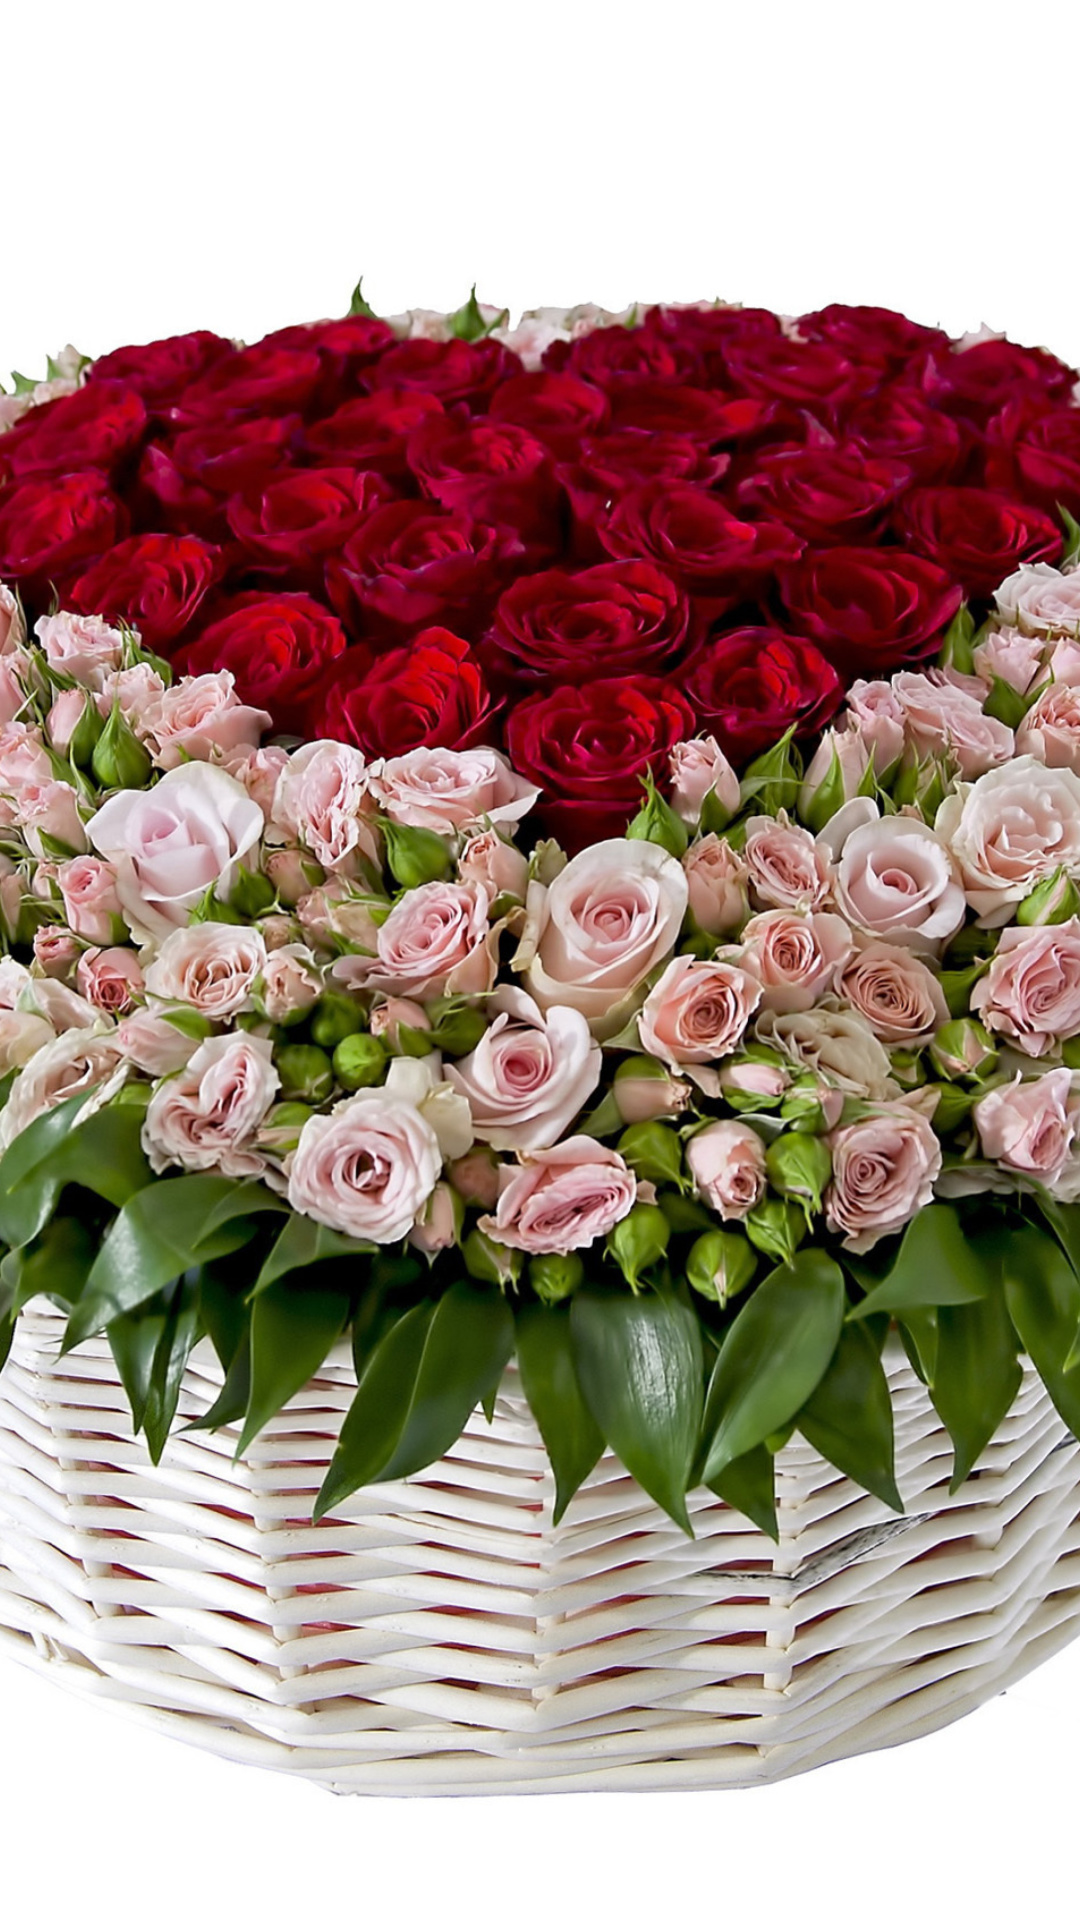 Basket of Roses from Florist wallpaper 1080x1920